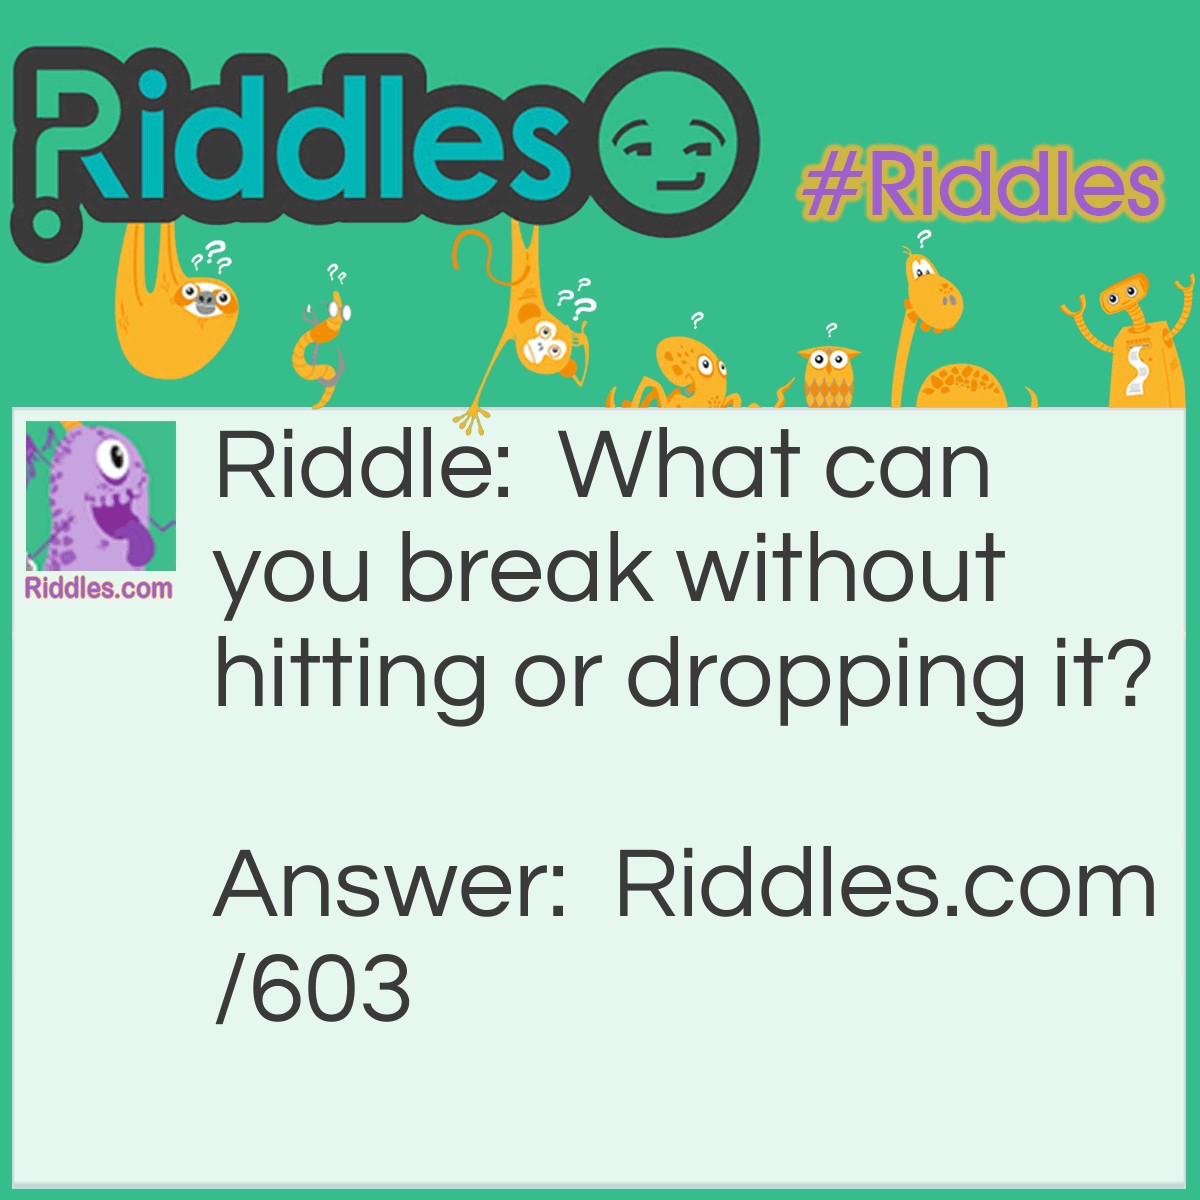 Riddle: What can you break without hitting or dropping it? Answer: A promise.